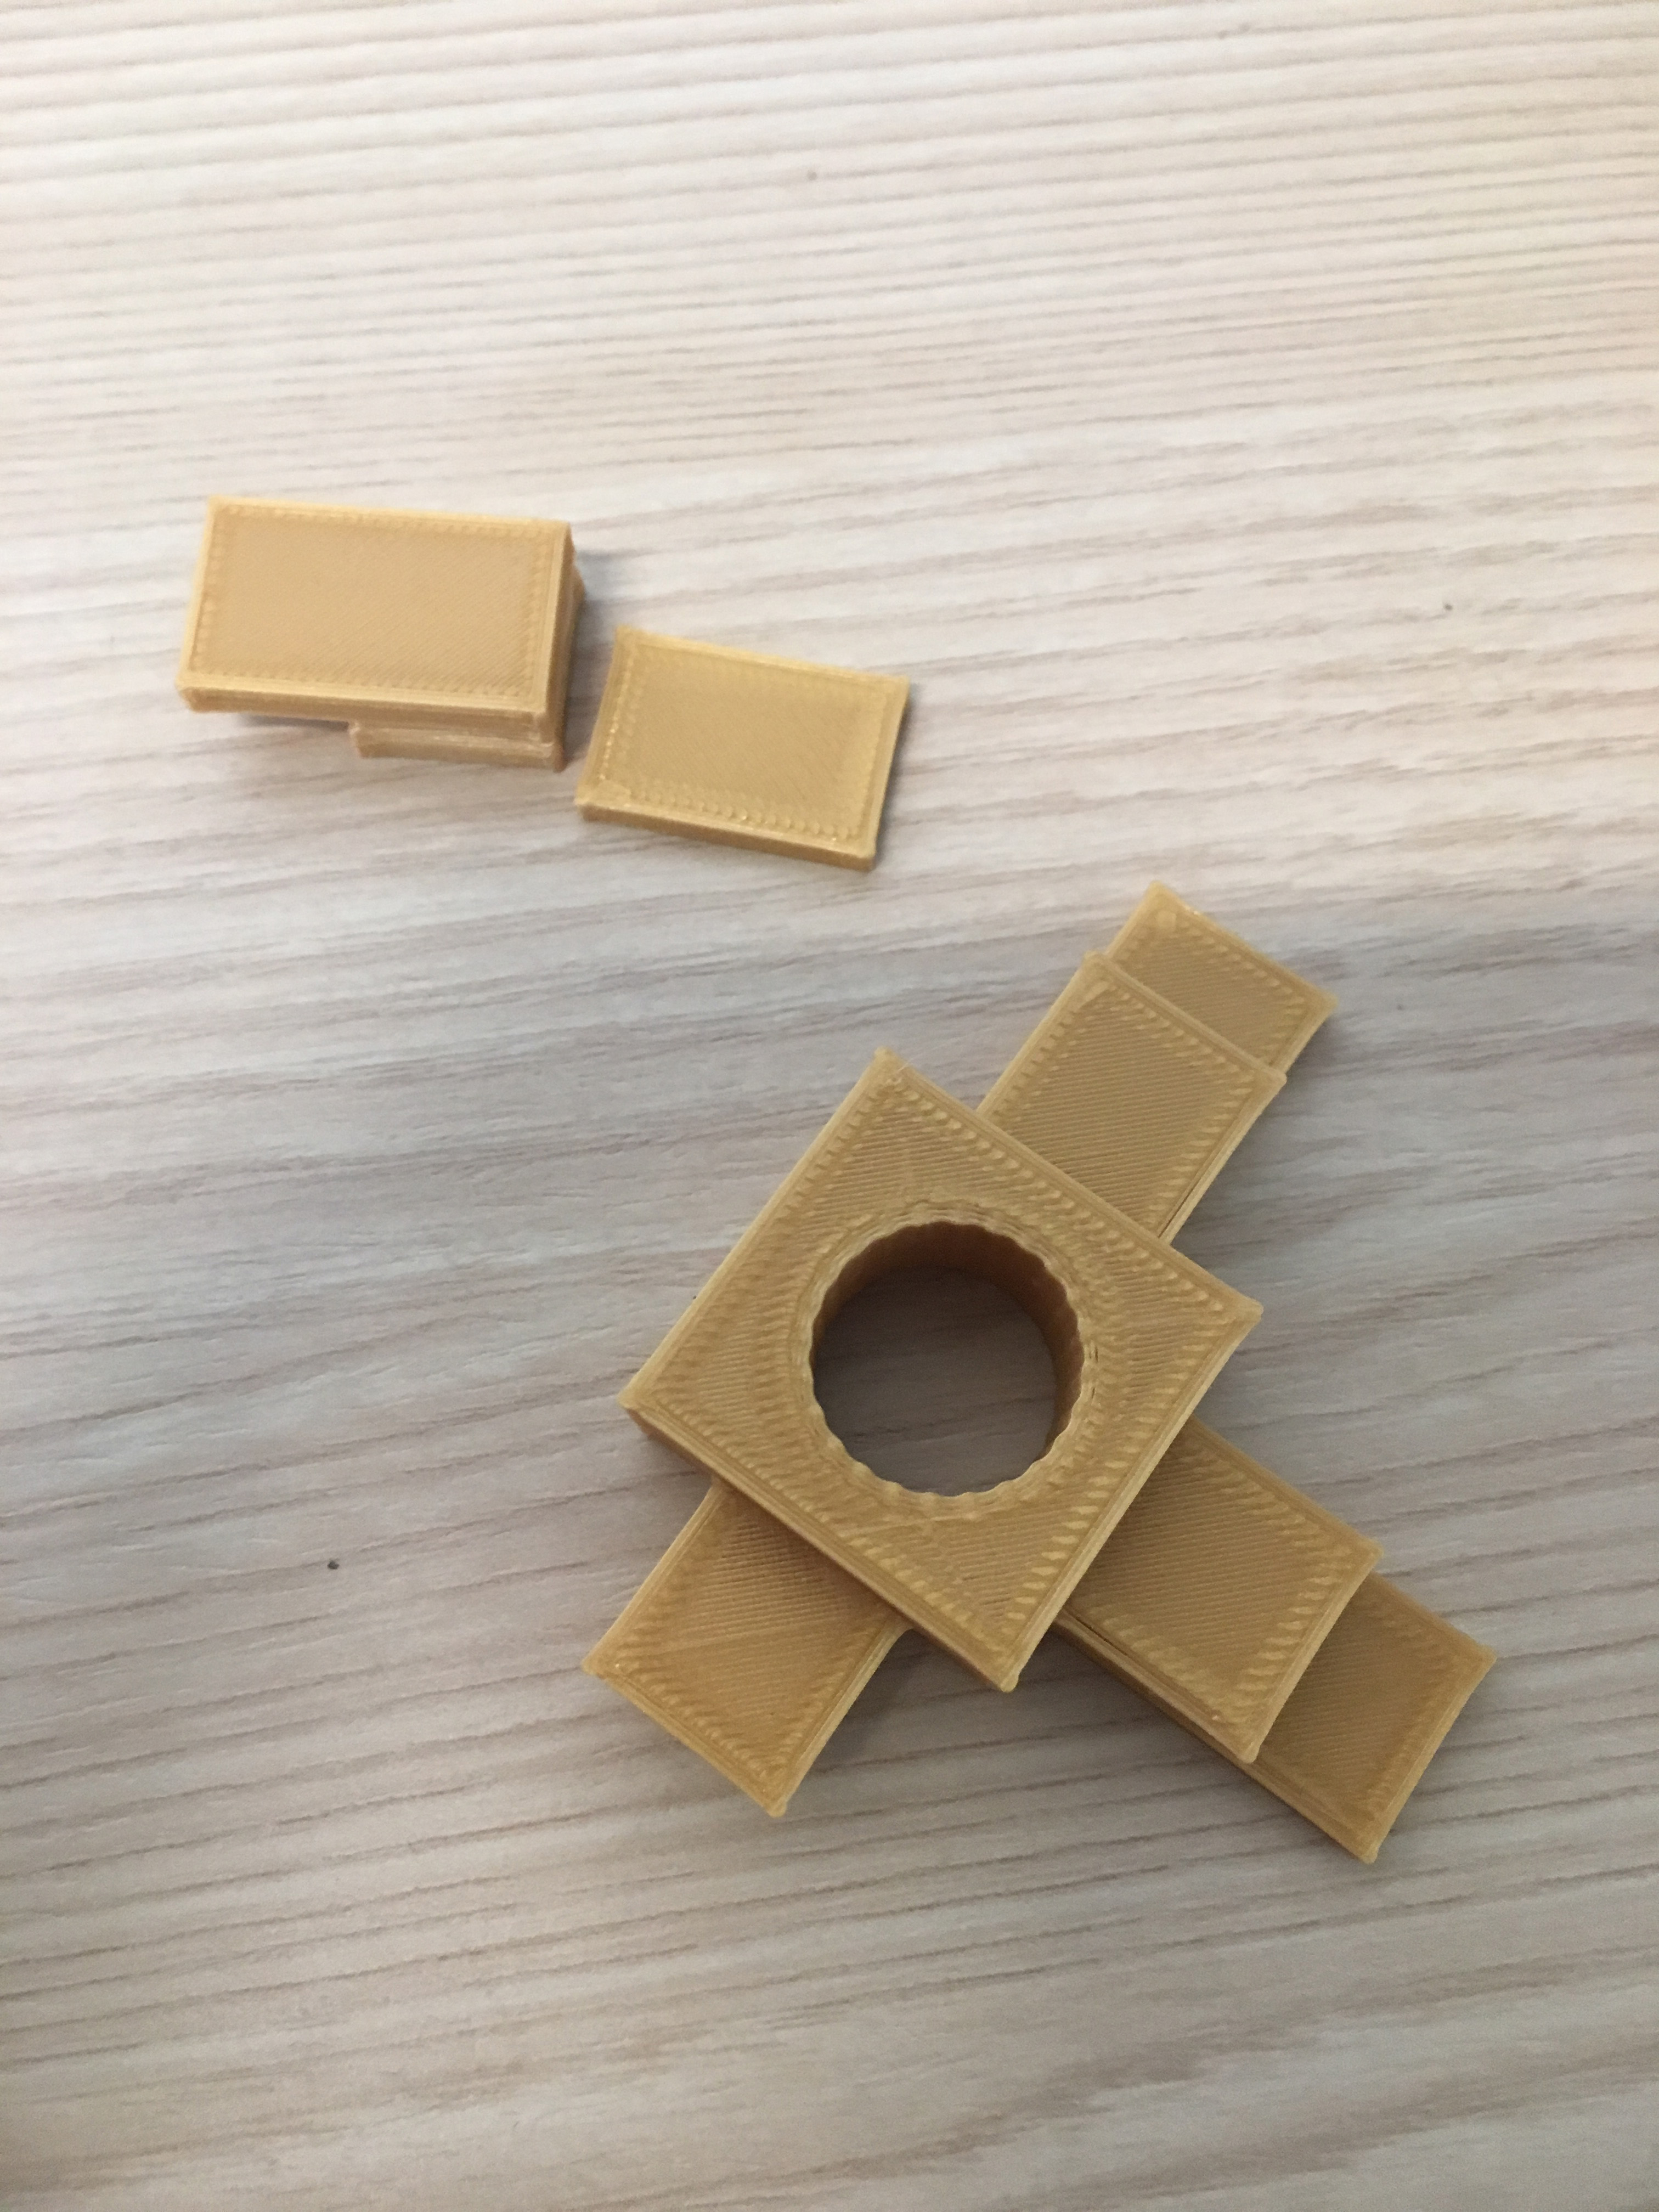 An example of a fidget that printed incorrectly. The center hole was too small to fit a bearing, and some of the edges were not properly attached to the fidget before printing.